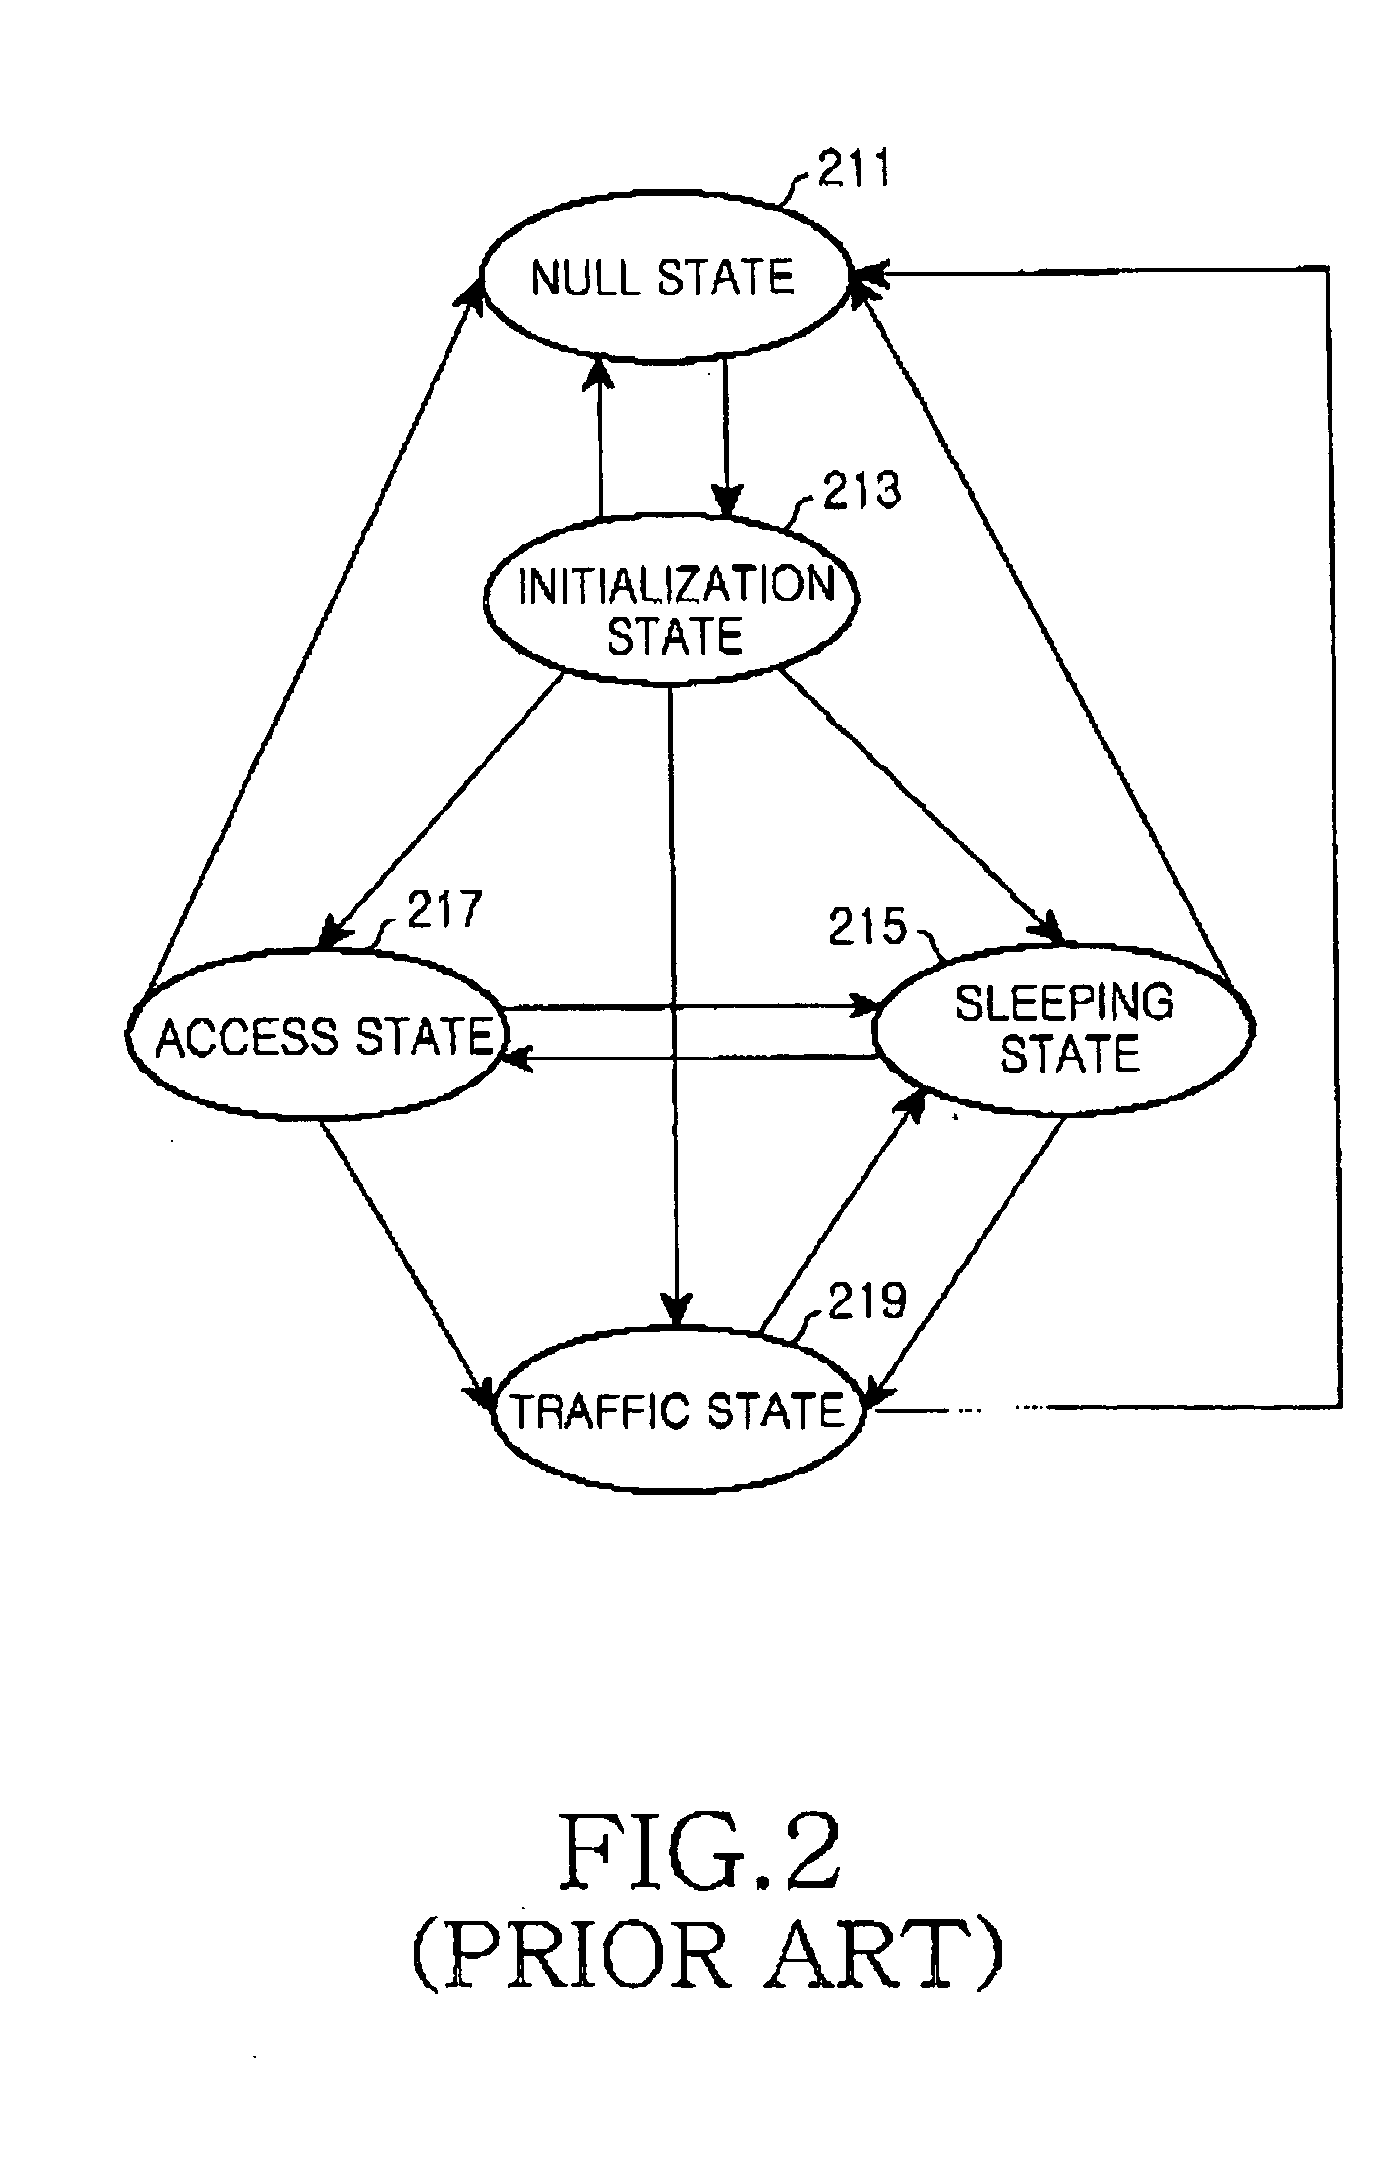 Apparatus and method for transmitting wakeup channel for mode transition in sleeping state in a broadband wireless communication system